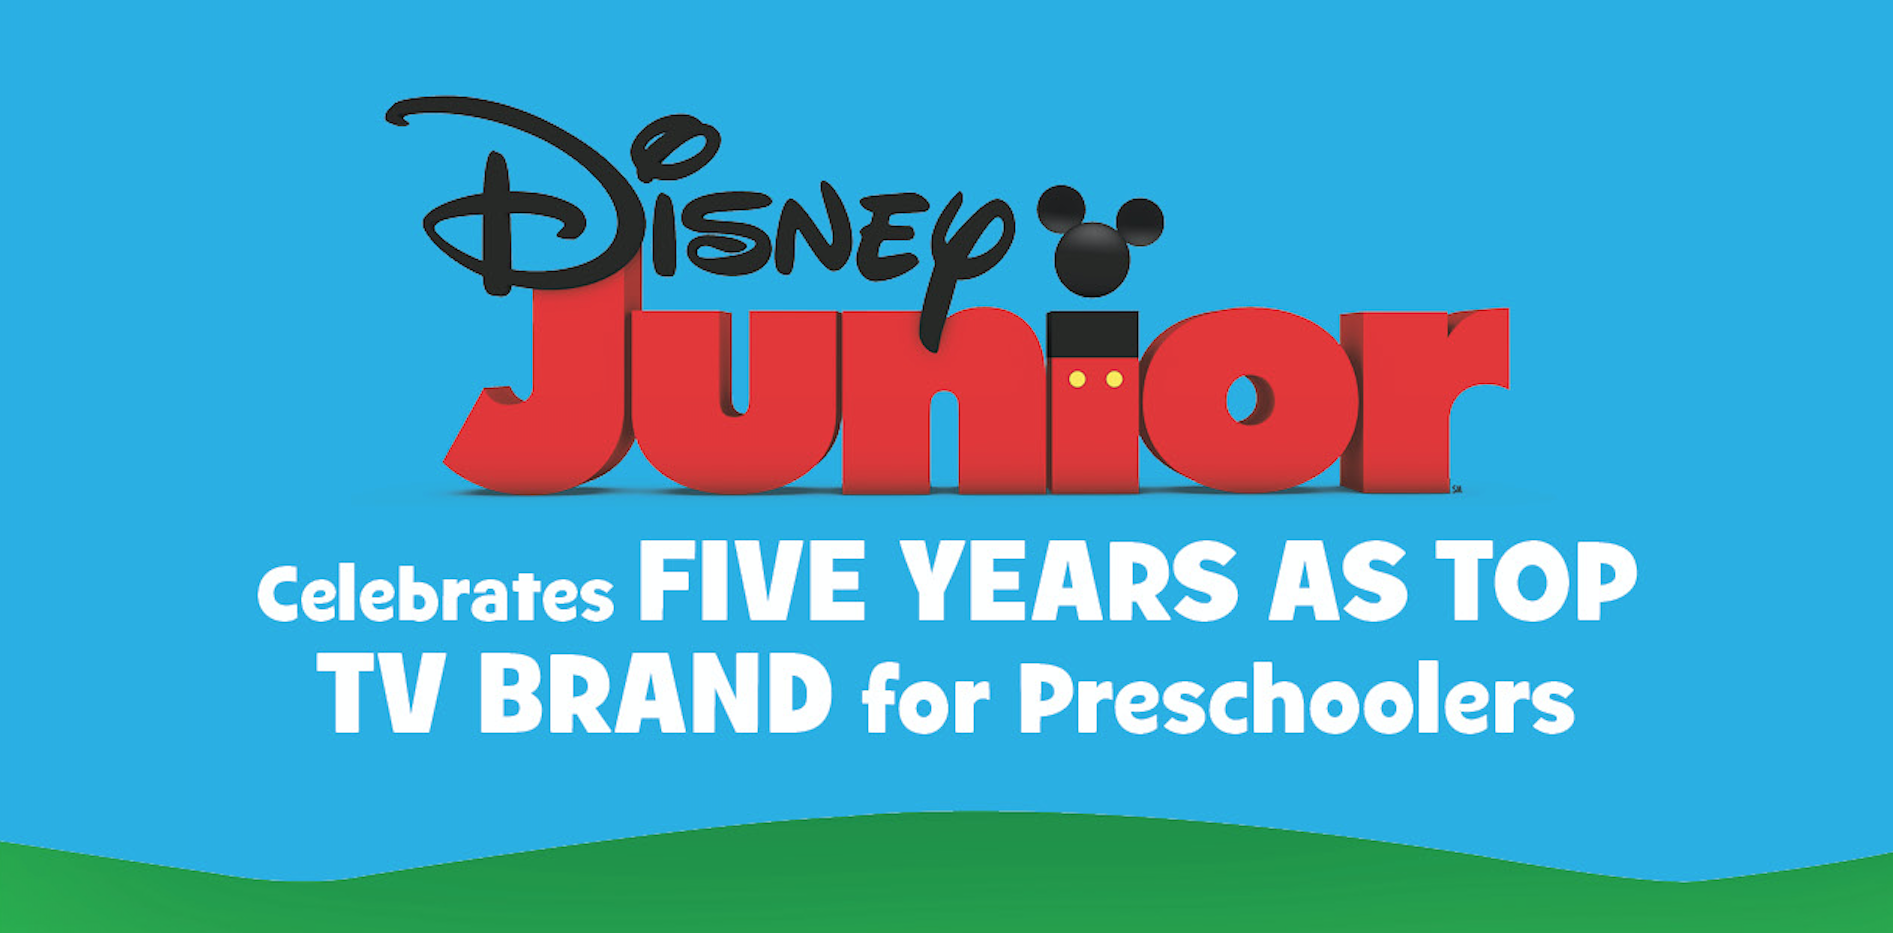 Disney Junior Celebrates Five Years as Top TV Brand for